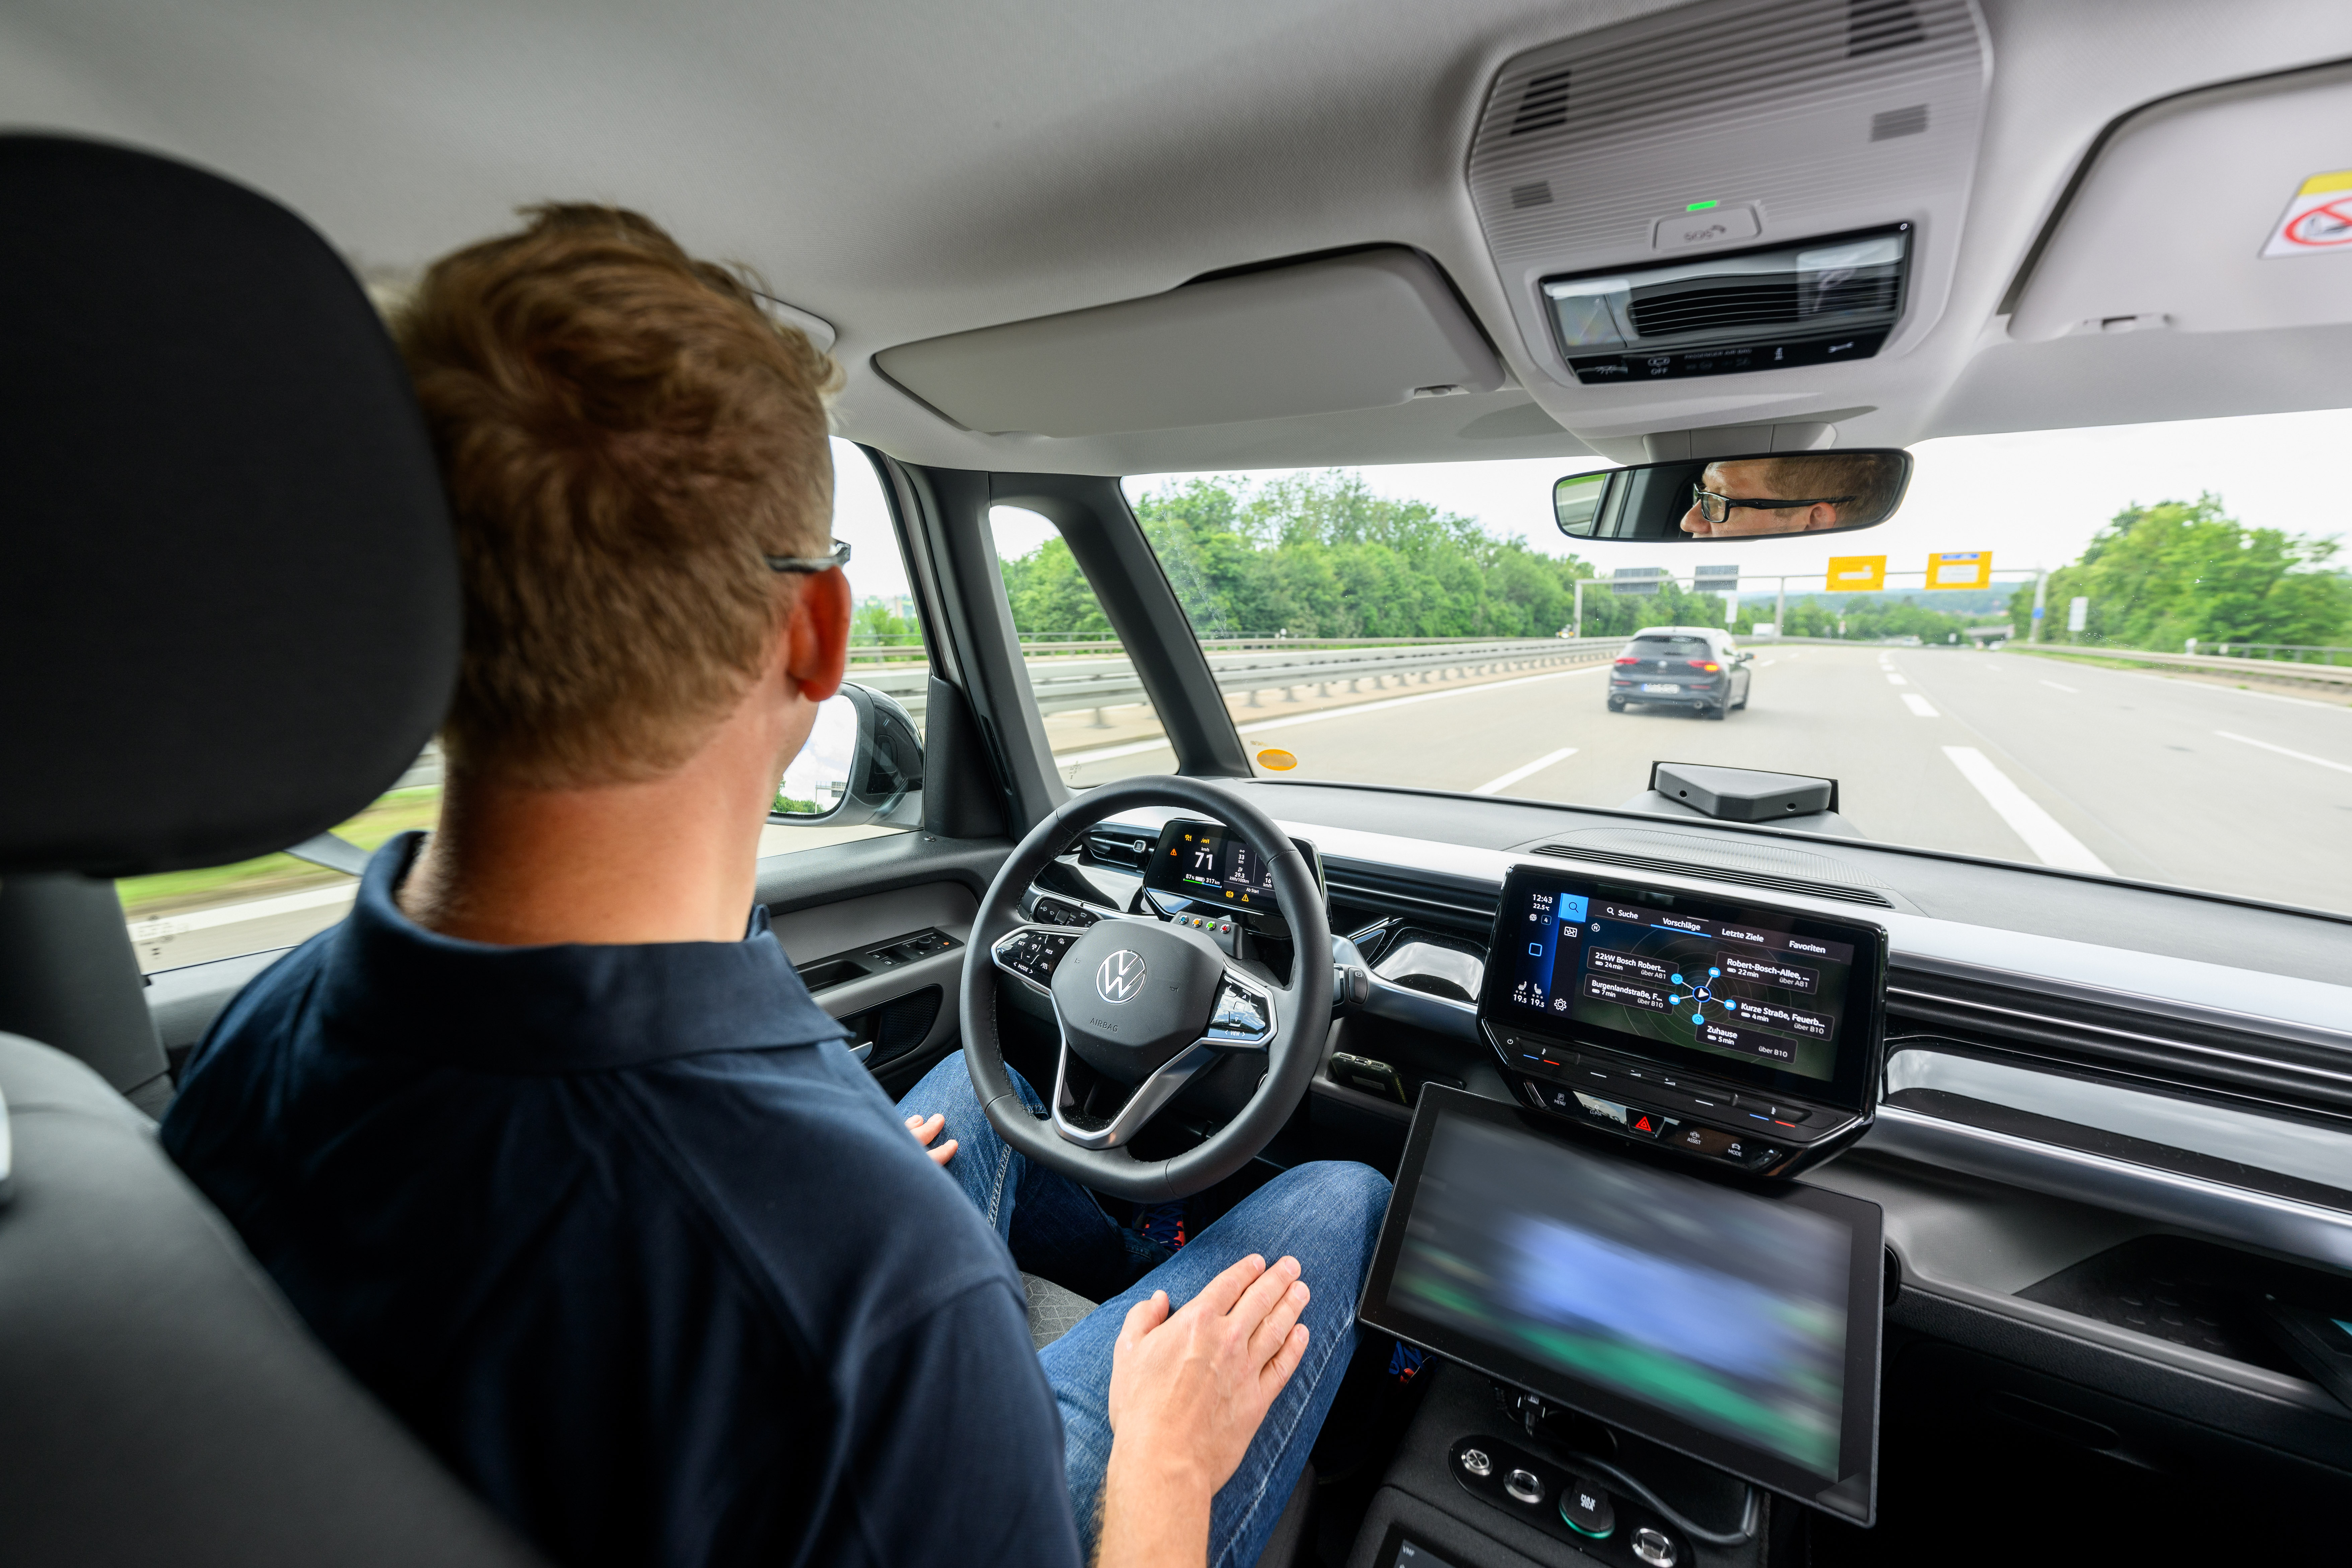 Automated Driving Alliance: Increased comfort through automated driving functions